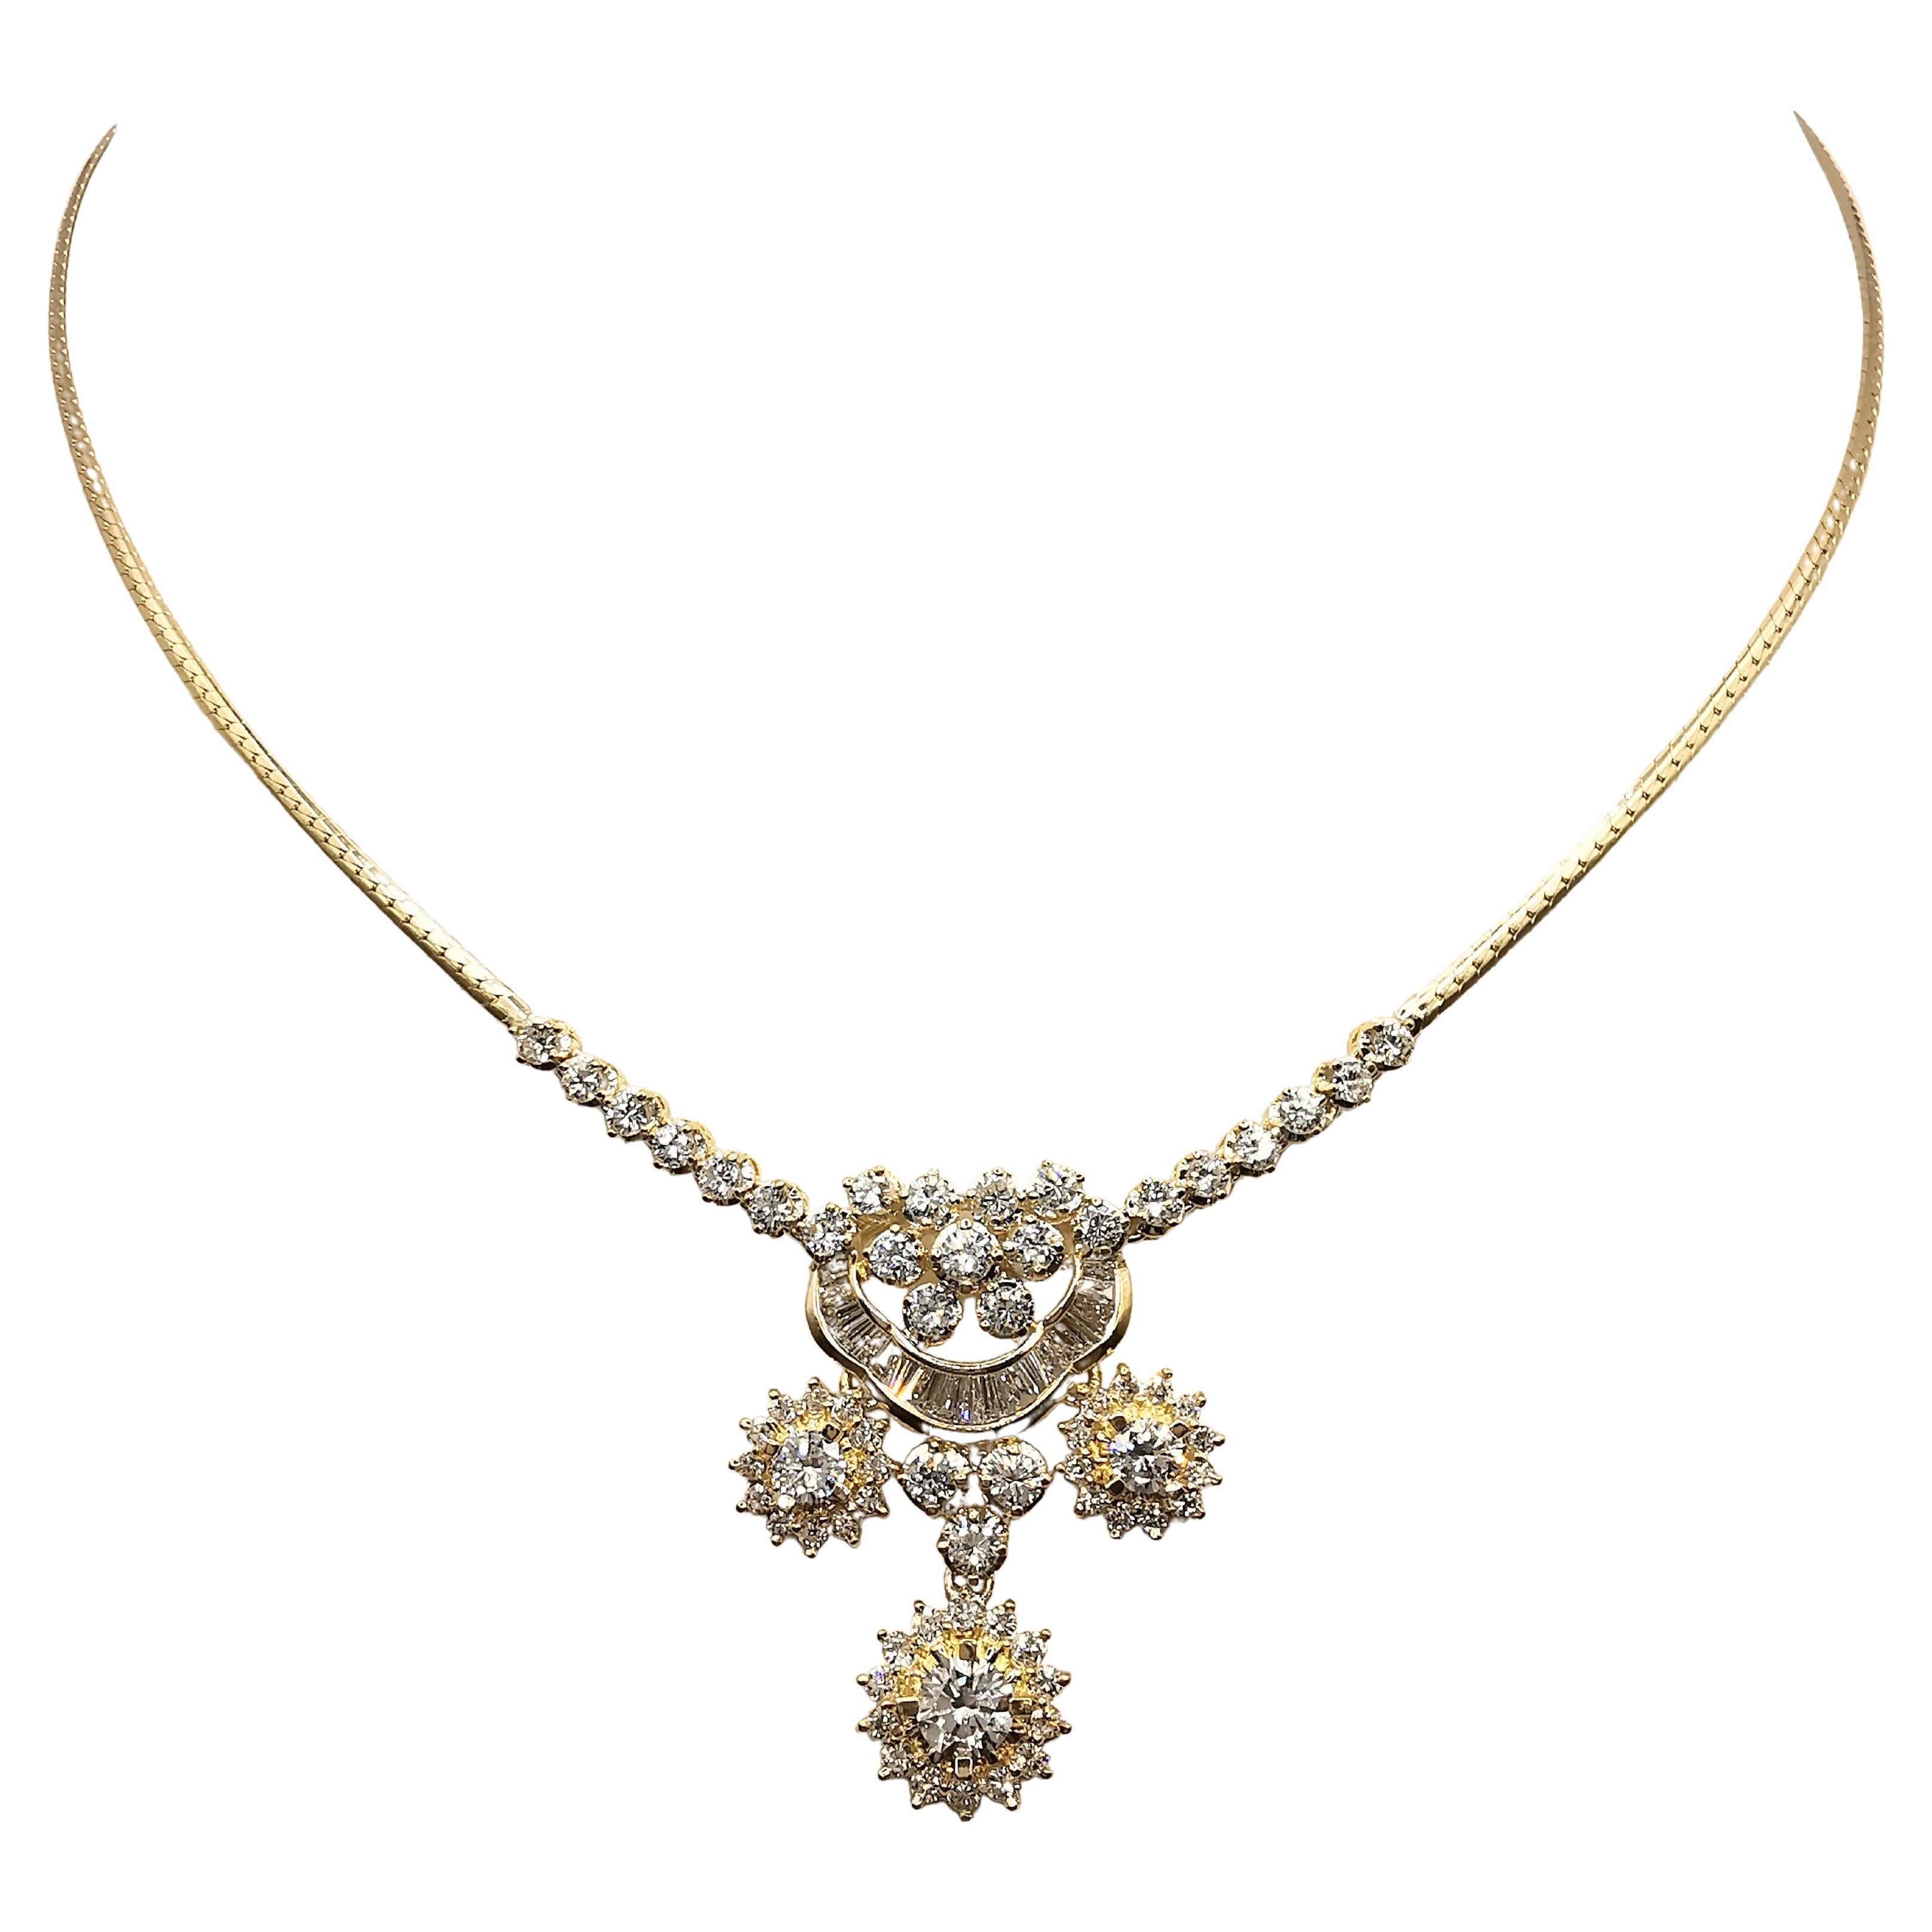 Vintage 3.19 Carat Diamond Necklace in 18-20k Yellow Gold For Sale